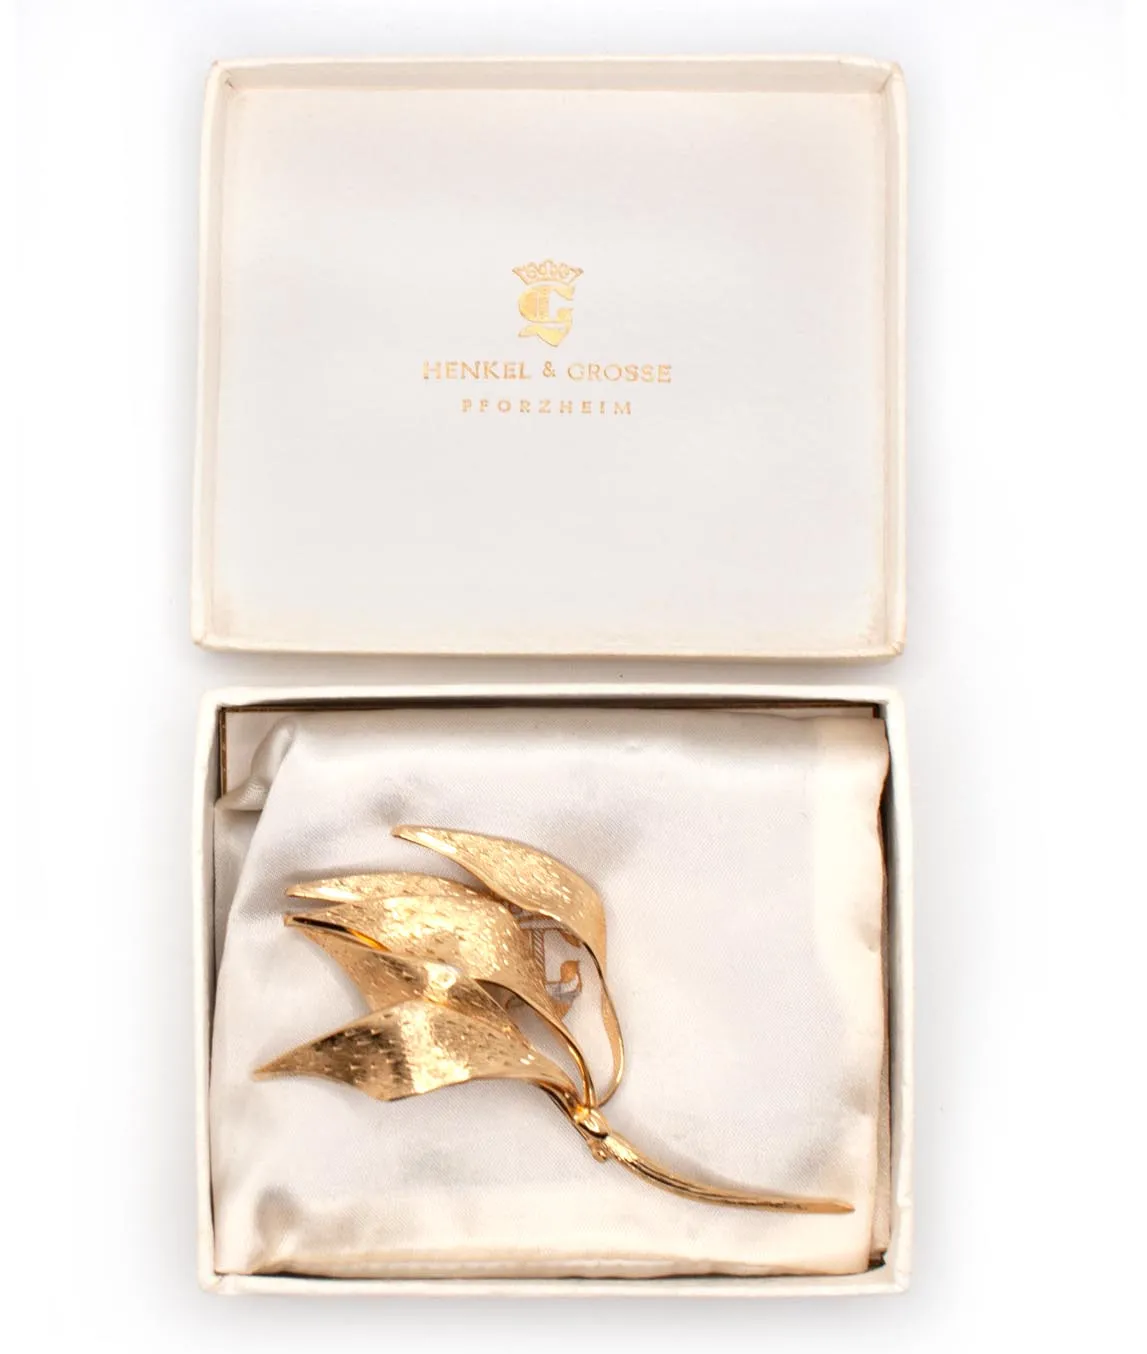 Gold-plated multi-leaf brooch by Henkel and Grosse with textured metal leaves in box with satin liner